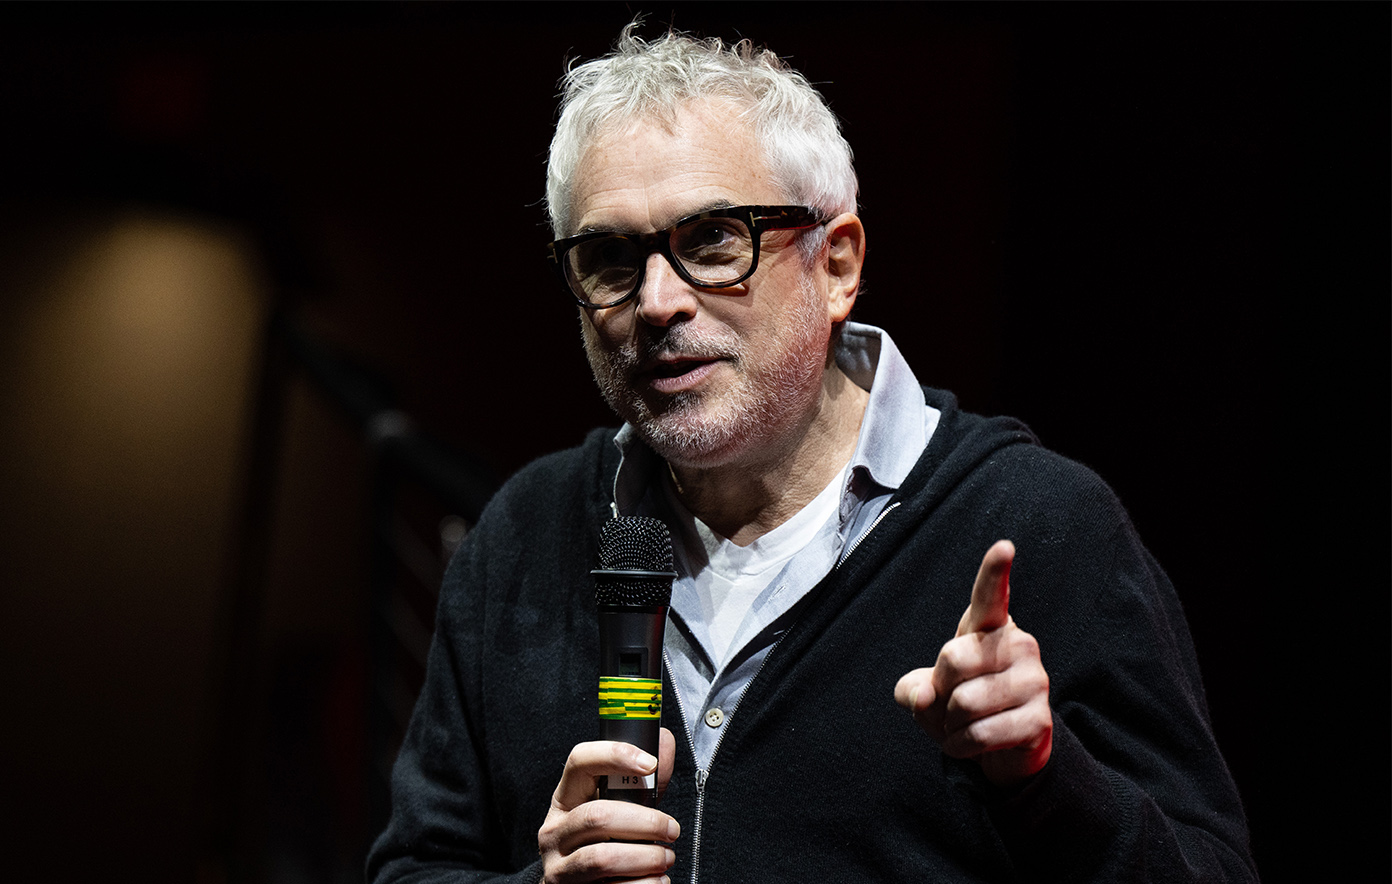 Guillermo Del Toro told Alfonso Cuarón he was “an arrogant asshole” for considering passing on Harry Potter